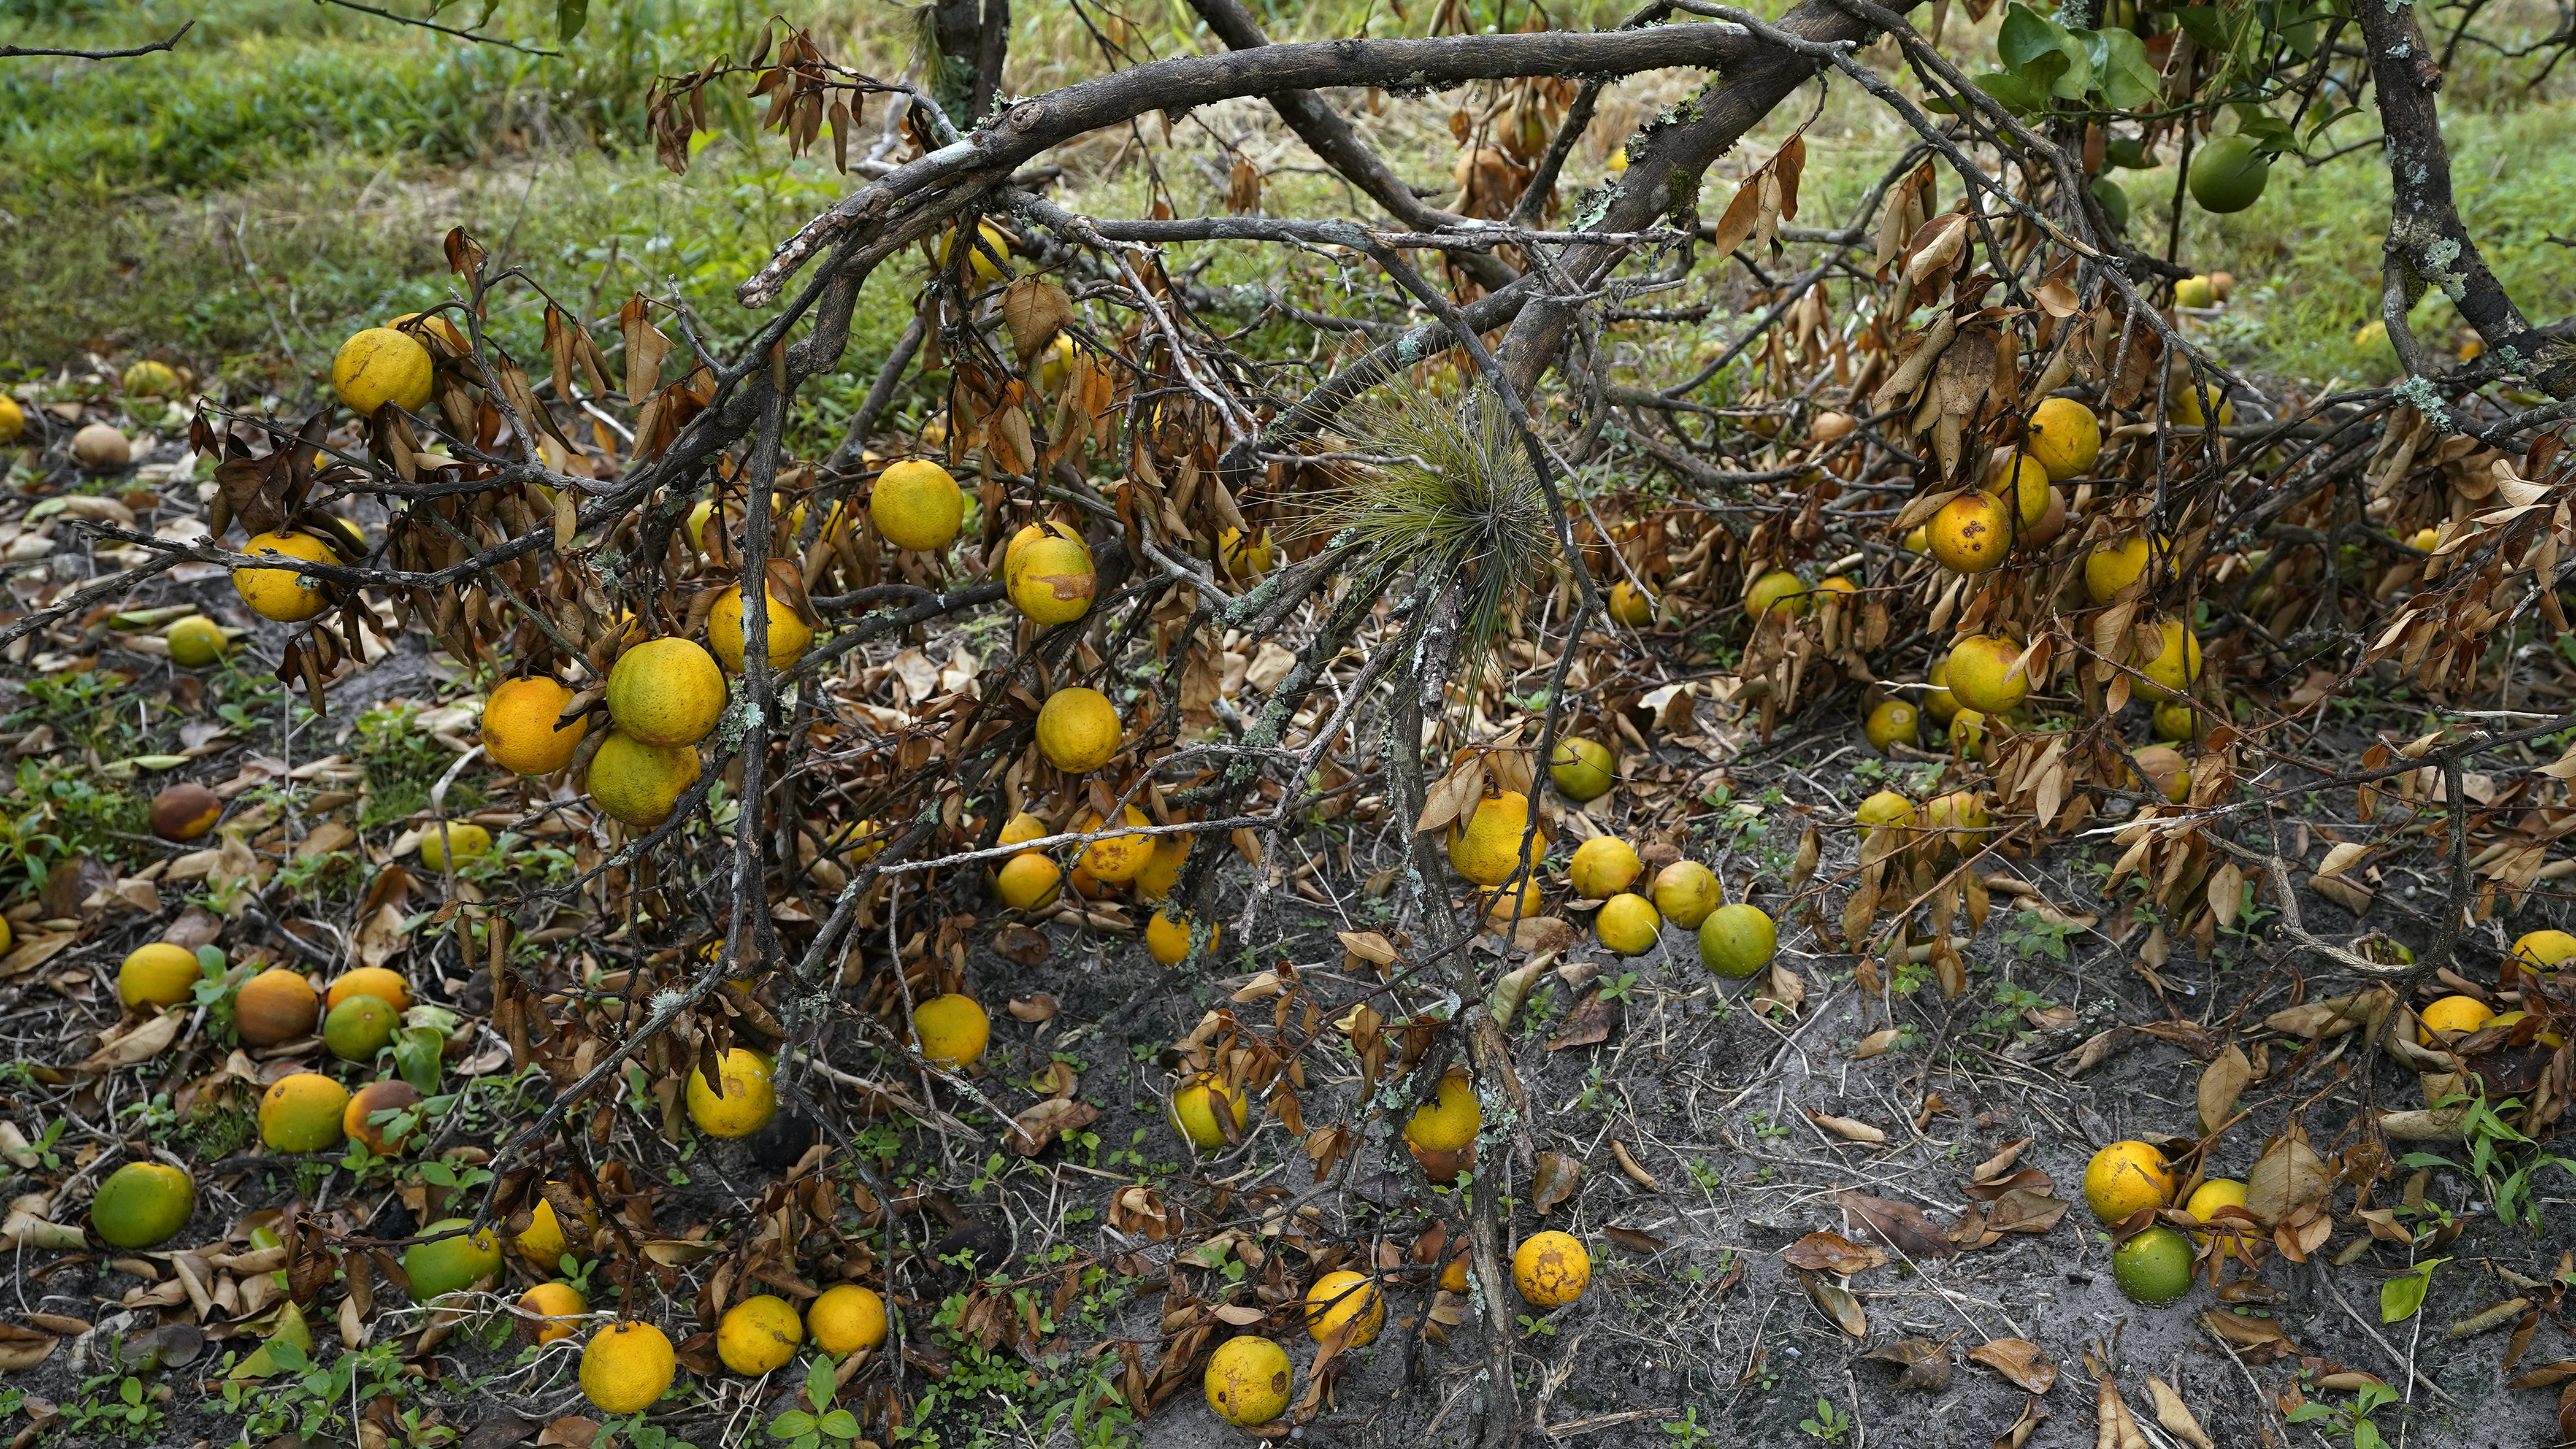 Florida's Orange Farmers Worried About Their Crops After Hearing the Newest Prediction